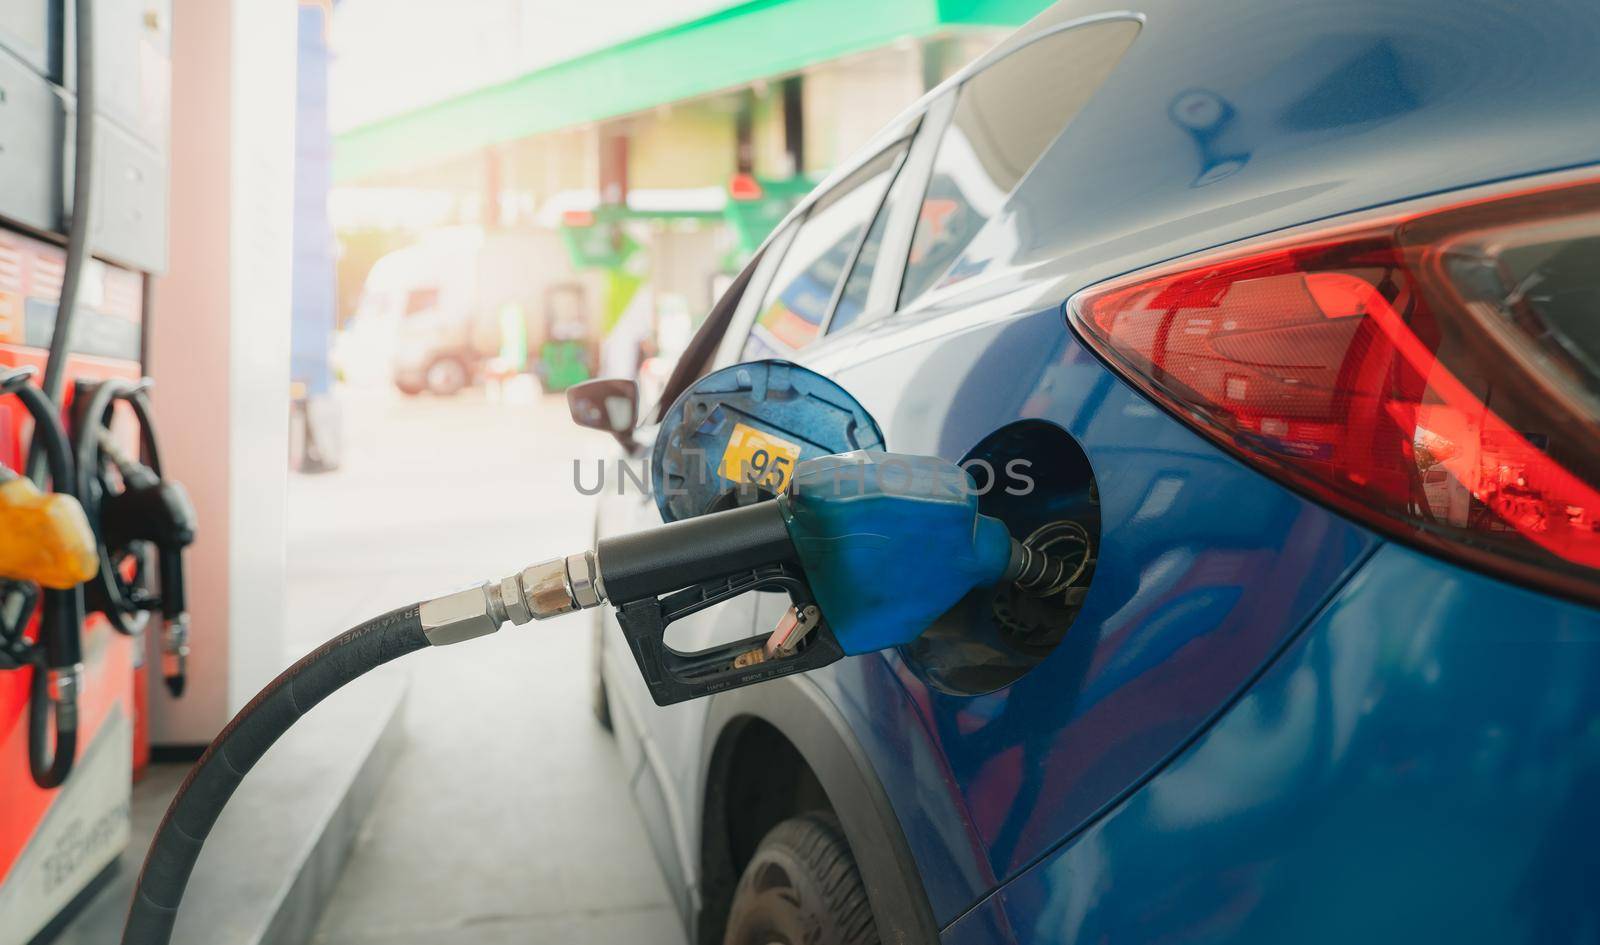 Car fueling at gas station. Refuel fill up with petrol gasoline. Petrol pump filling fuel nozzle in fuel tank of car at gas station. Petrol industry and service. Petrol price and oil crisis concept. by Fahroni